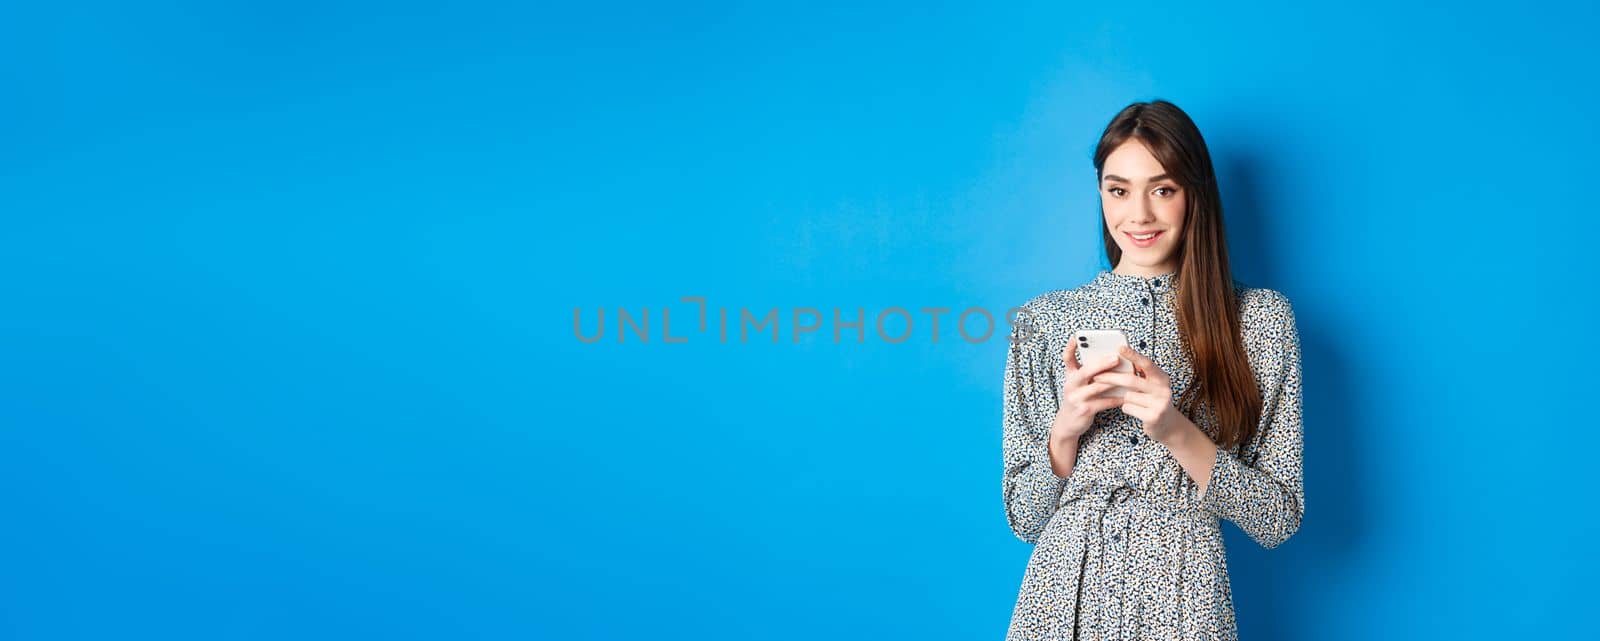 Attractive caucasian woman in dress using mobile phone and smiling, standing in dress against blue background.